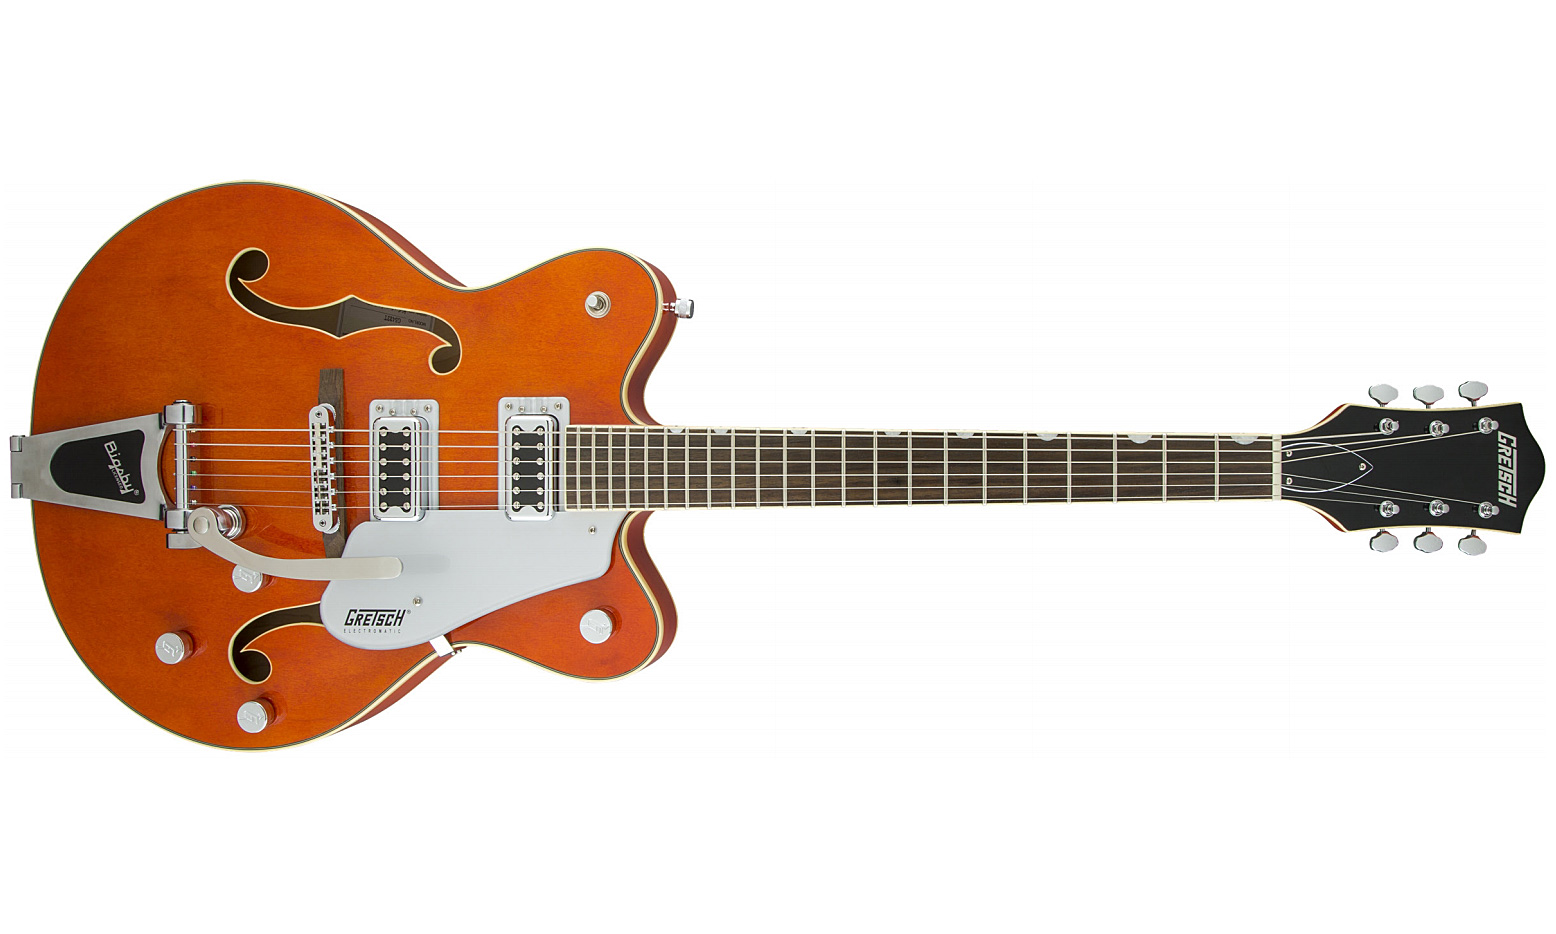 Gretsch G5422t Electromatic Hollow Body 2016 Bigsby - Orange Stain - Guitare Électrique 3/4 Caisse & Jazz - Variation 1